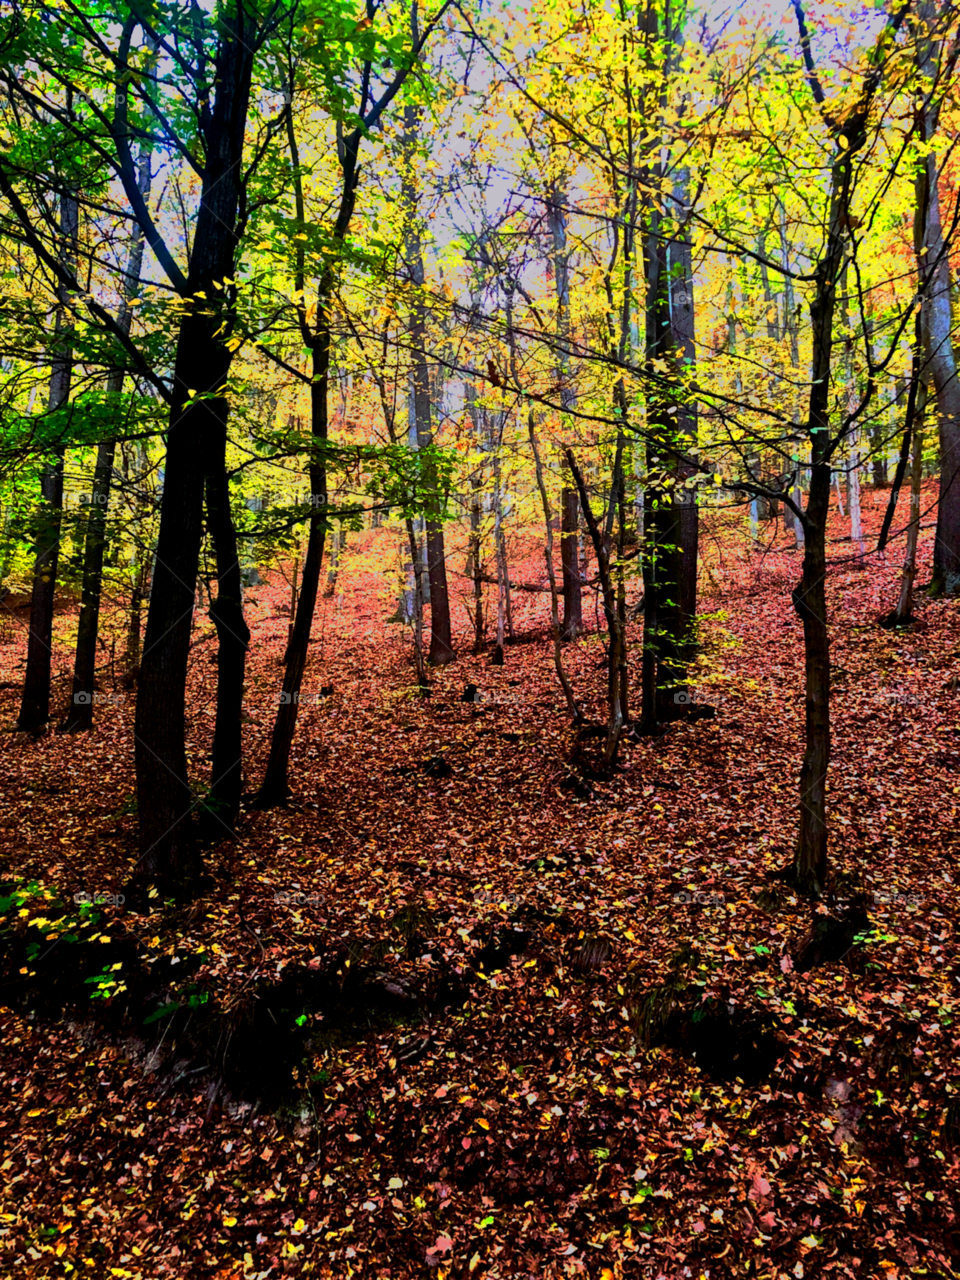 Beauty of Autumn Forest